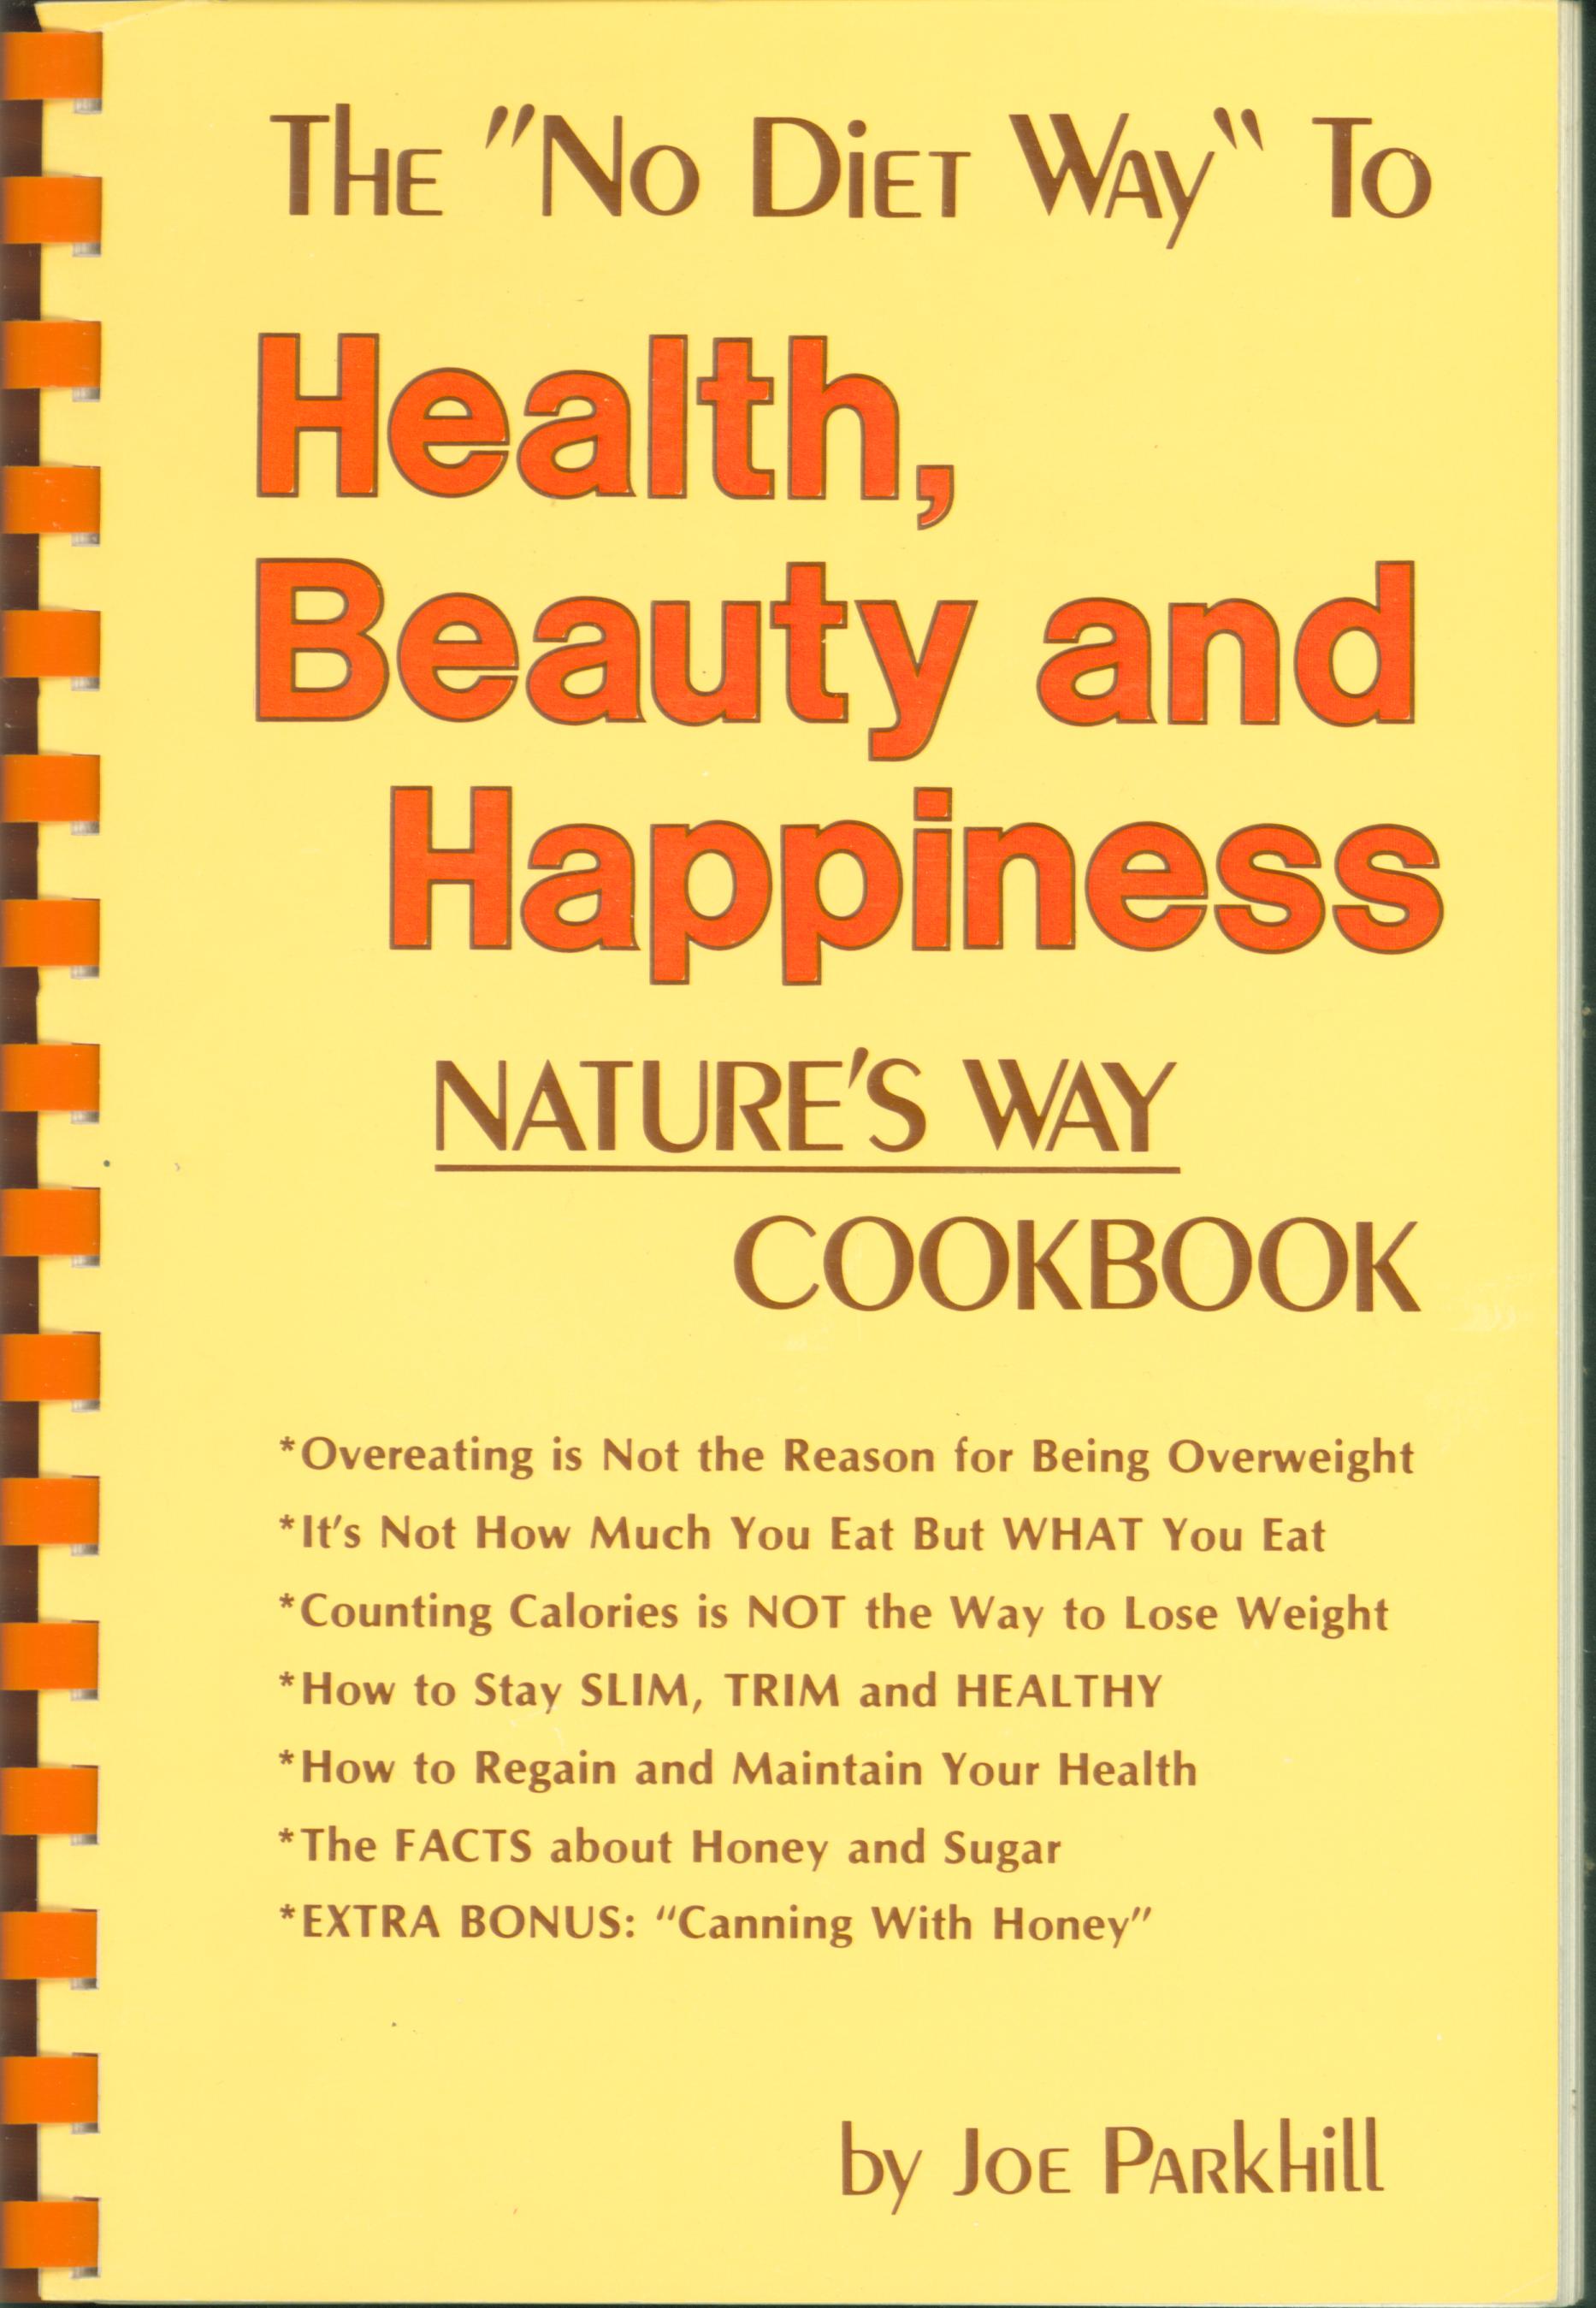 THE "NO DIET WAY" TO HEALTH, BEAUTY AND HAPPINESS: Nature's way cookbook.